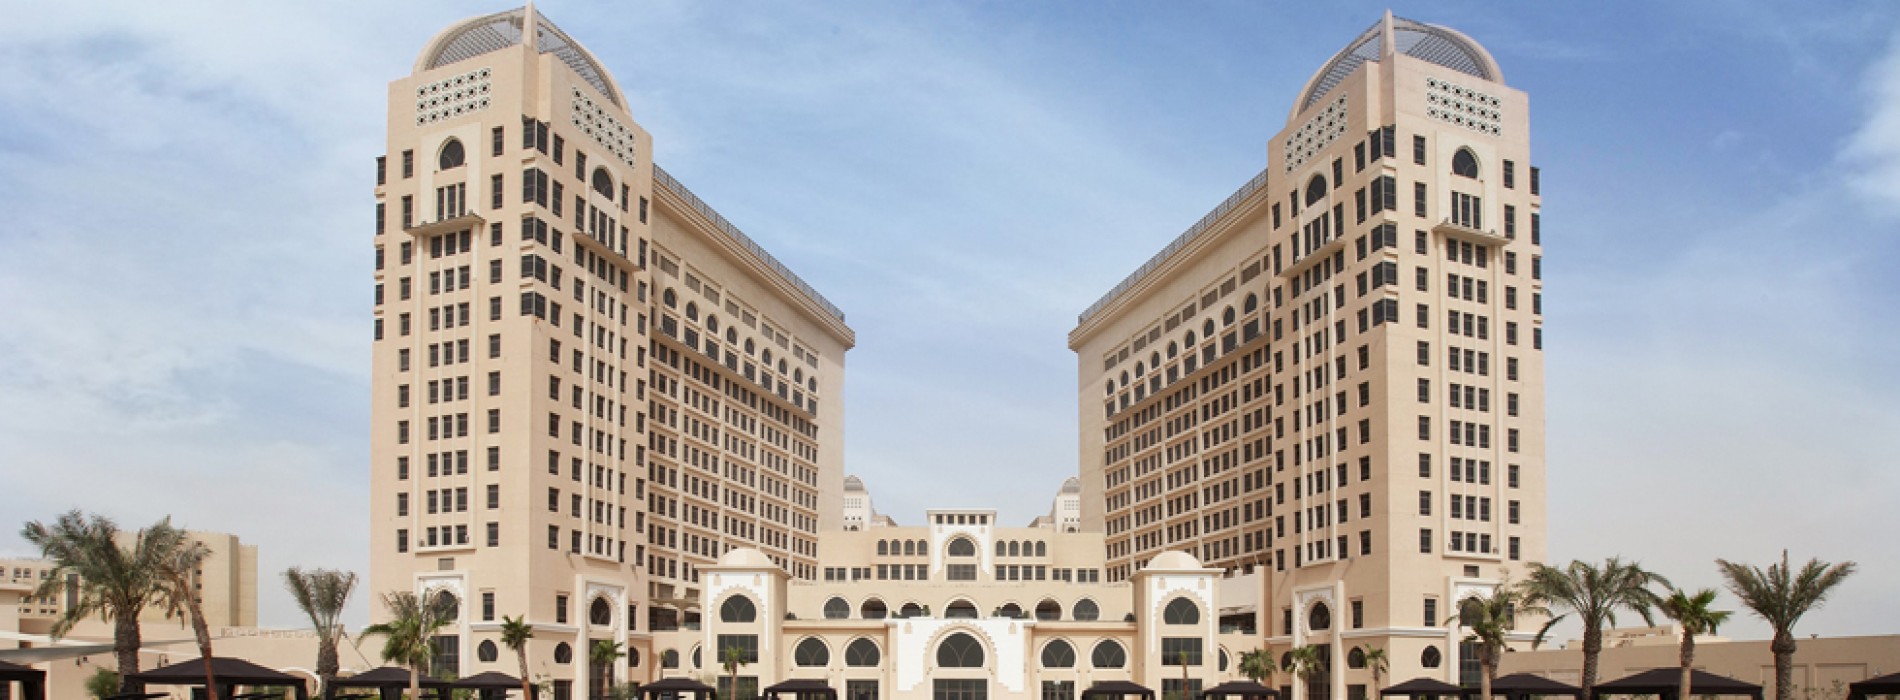 The St. Regis Doha is named Qatar’s Leading Resort by WTA 2017